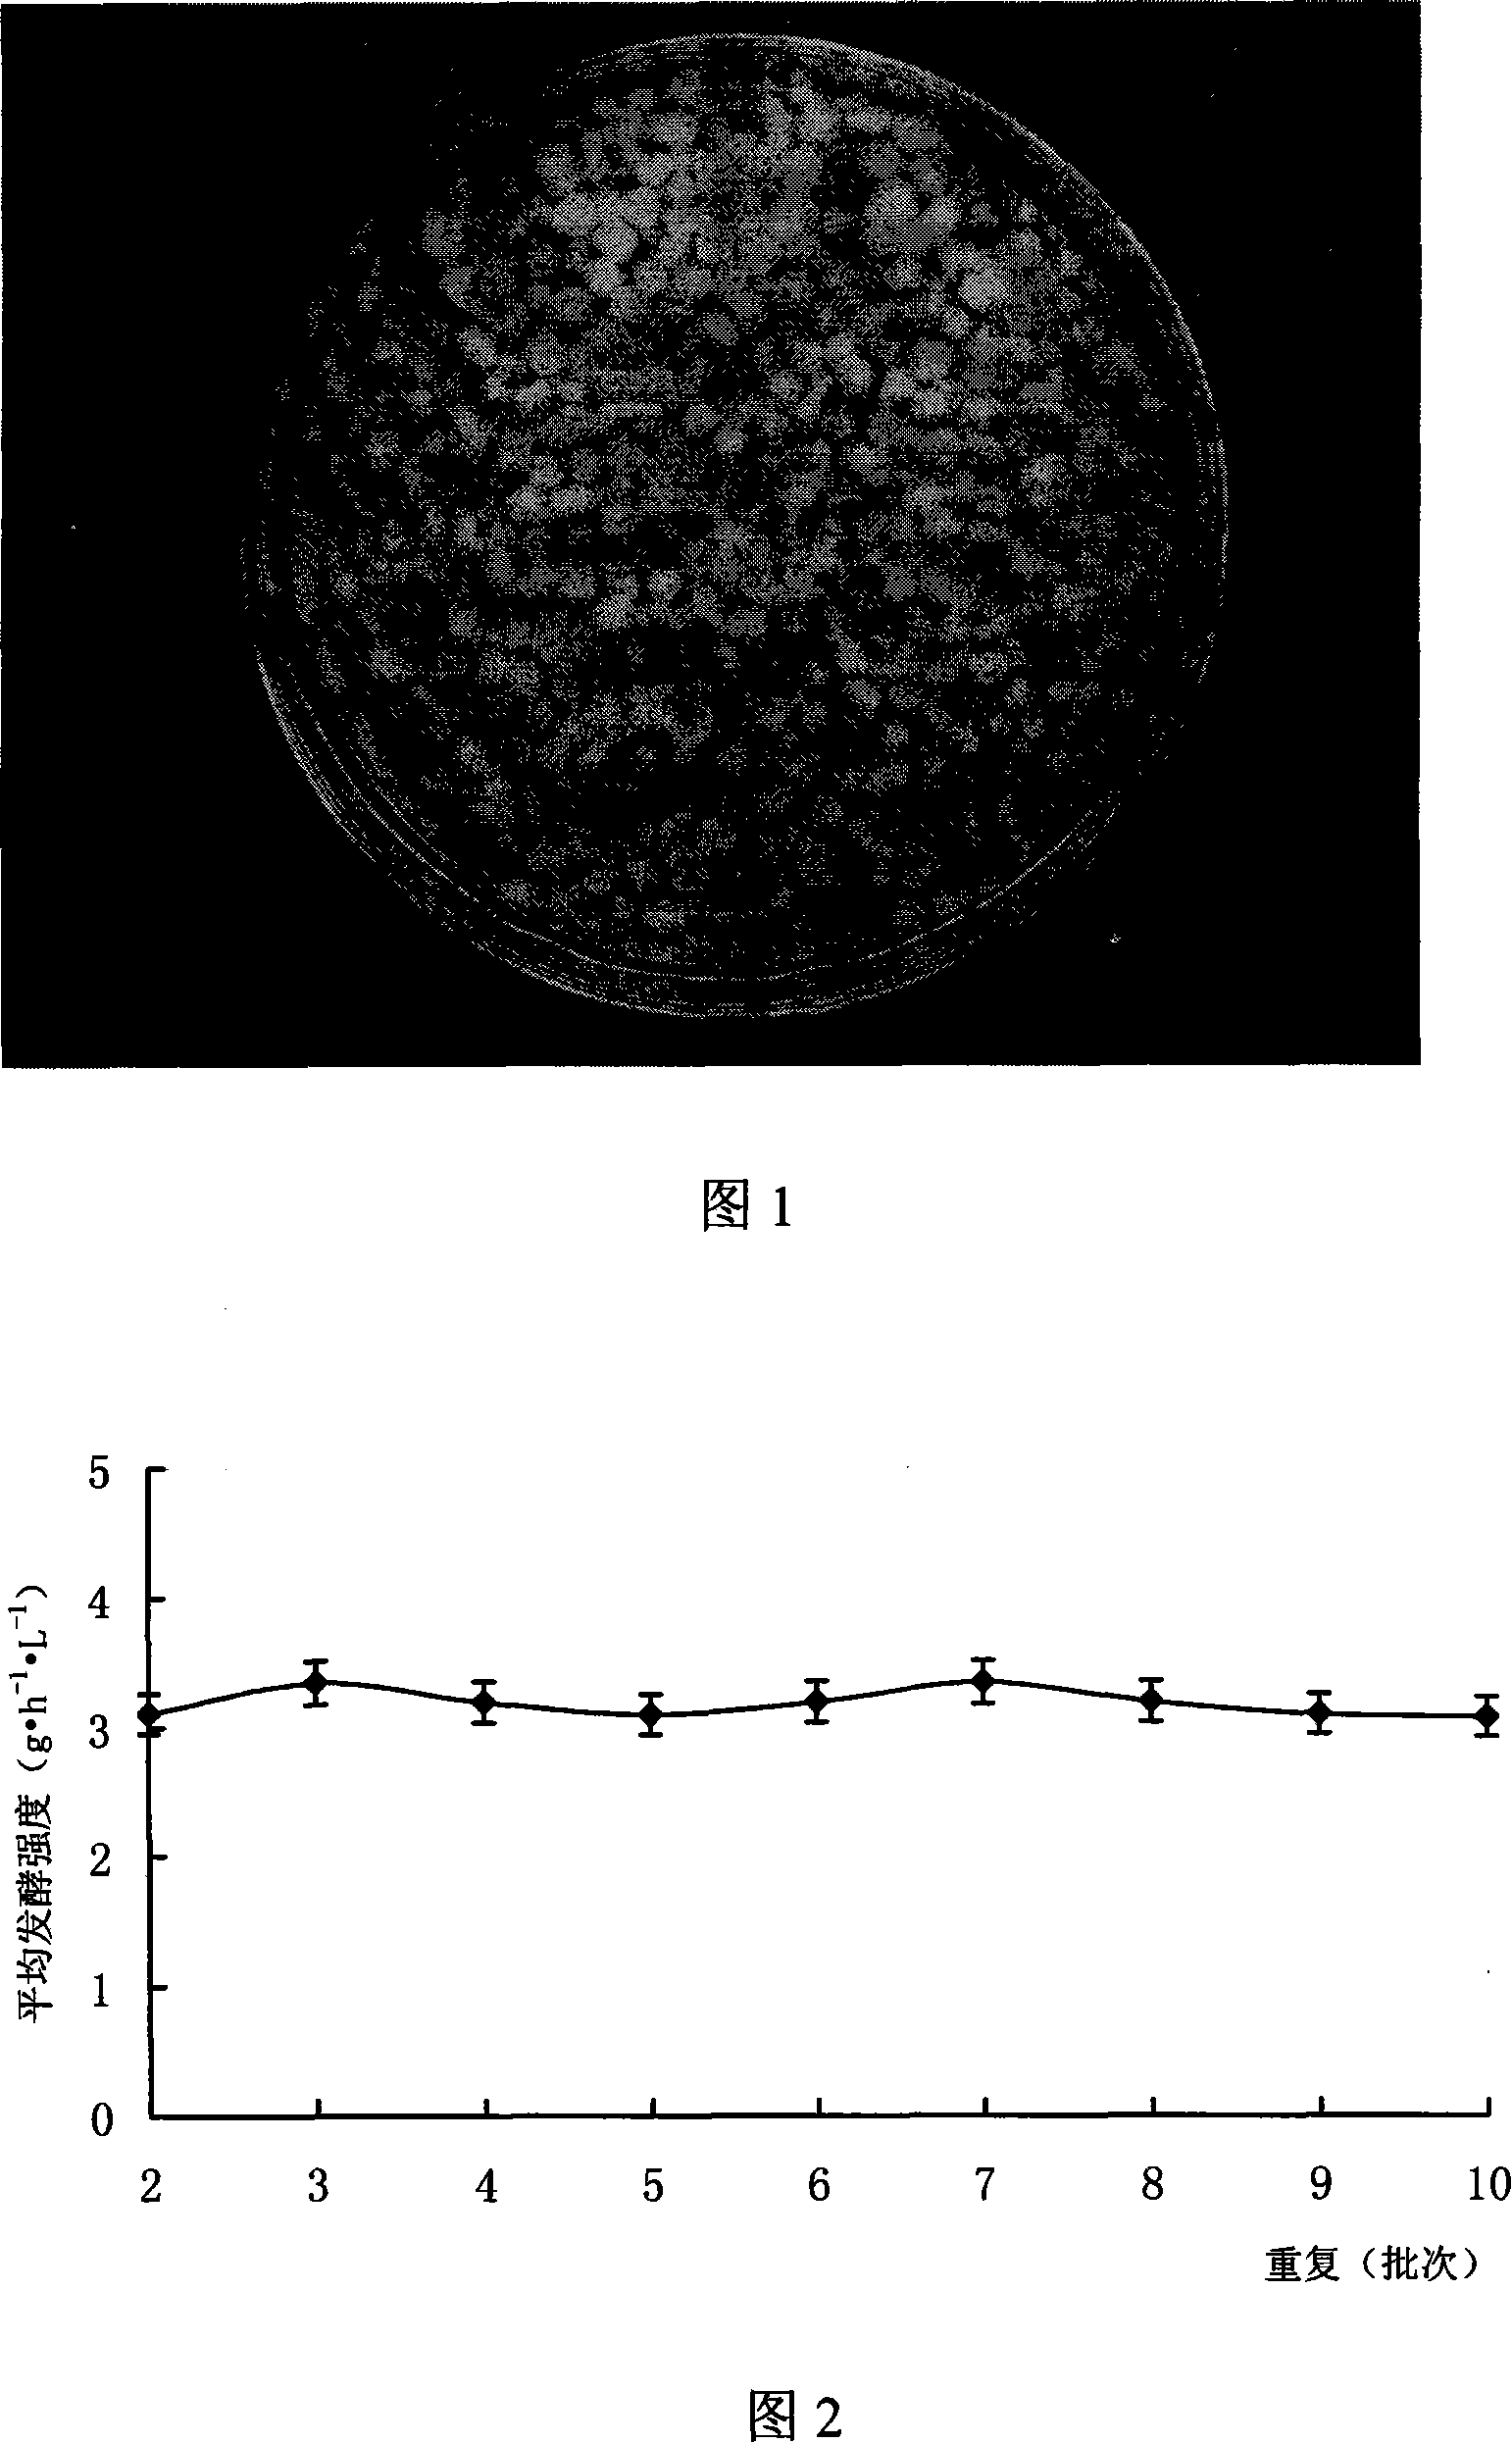 Immobilized cell single-tank high-strength continuous fermentation process for succinic acid